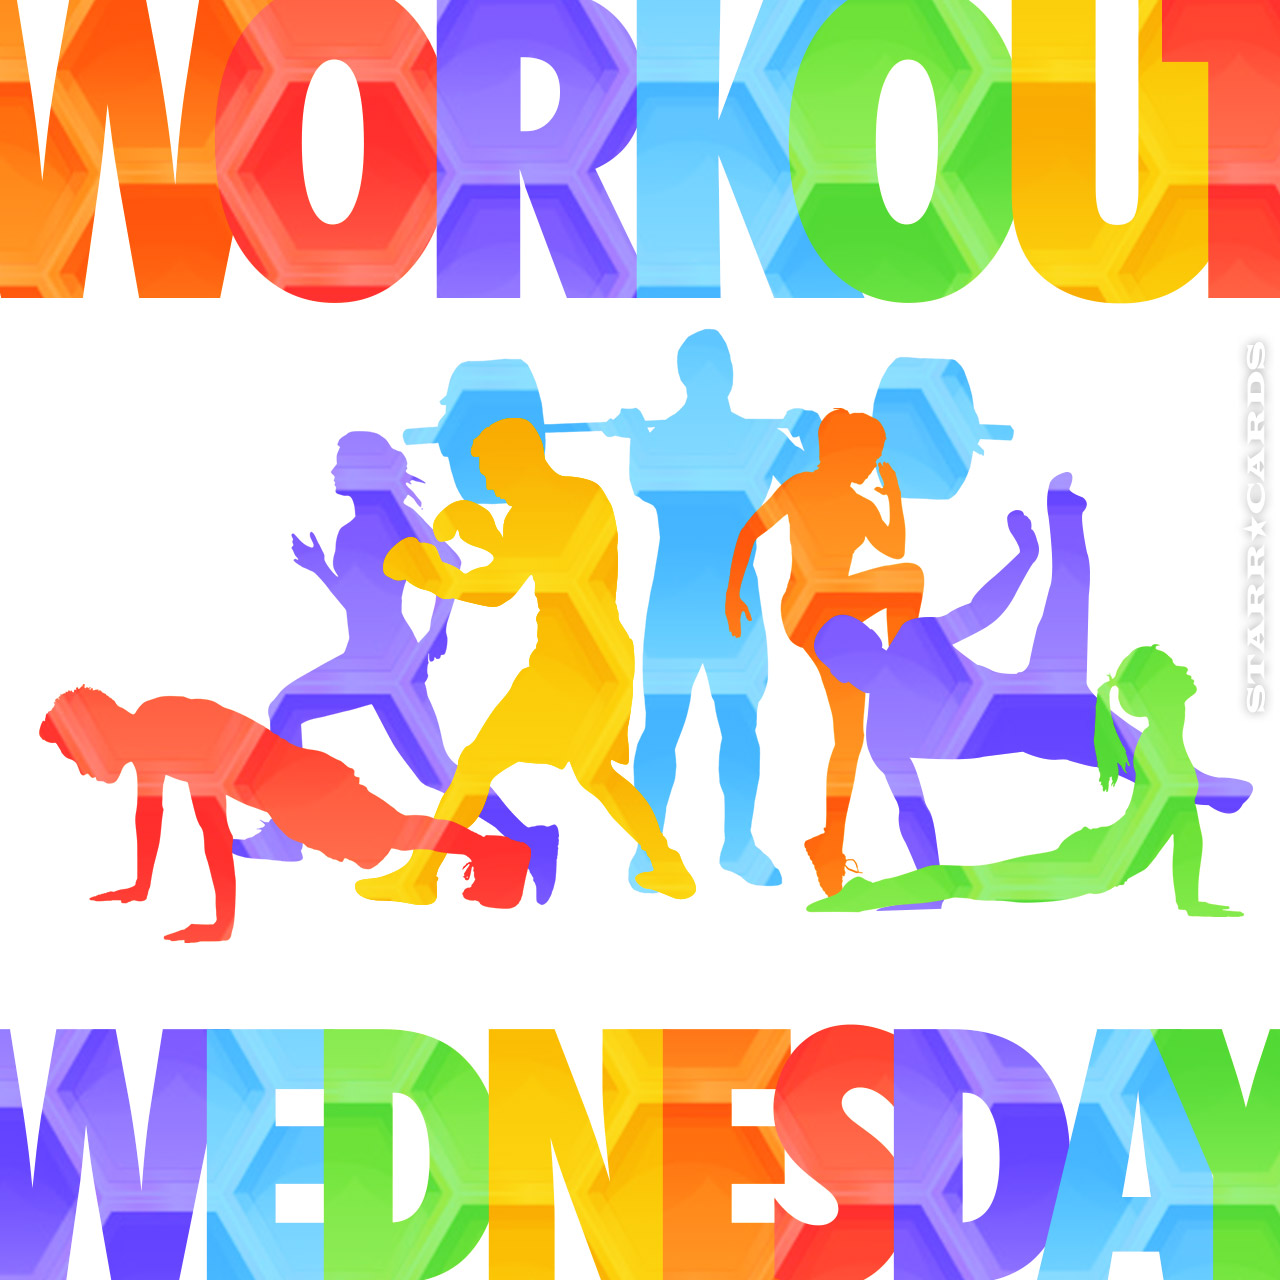 Workout Wednesday Poster for Sale by RiseandShineTee